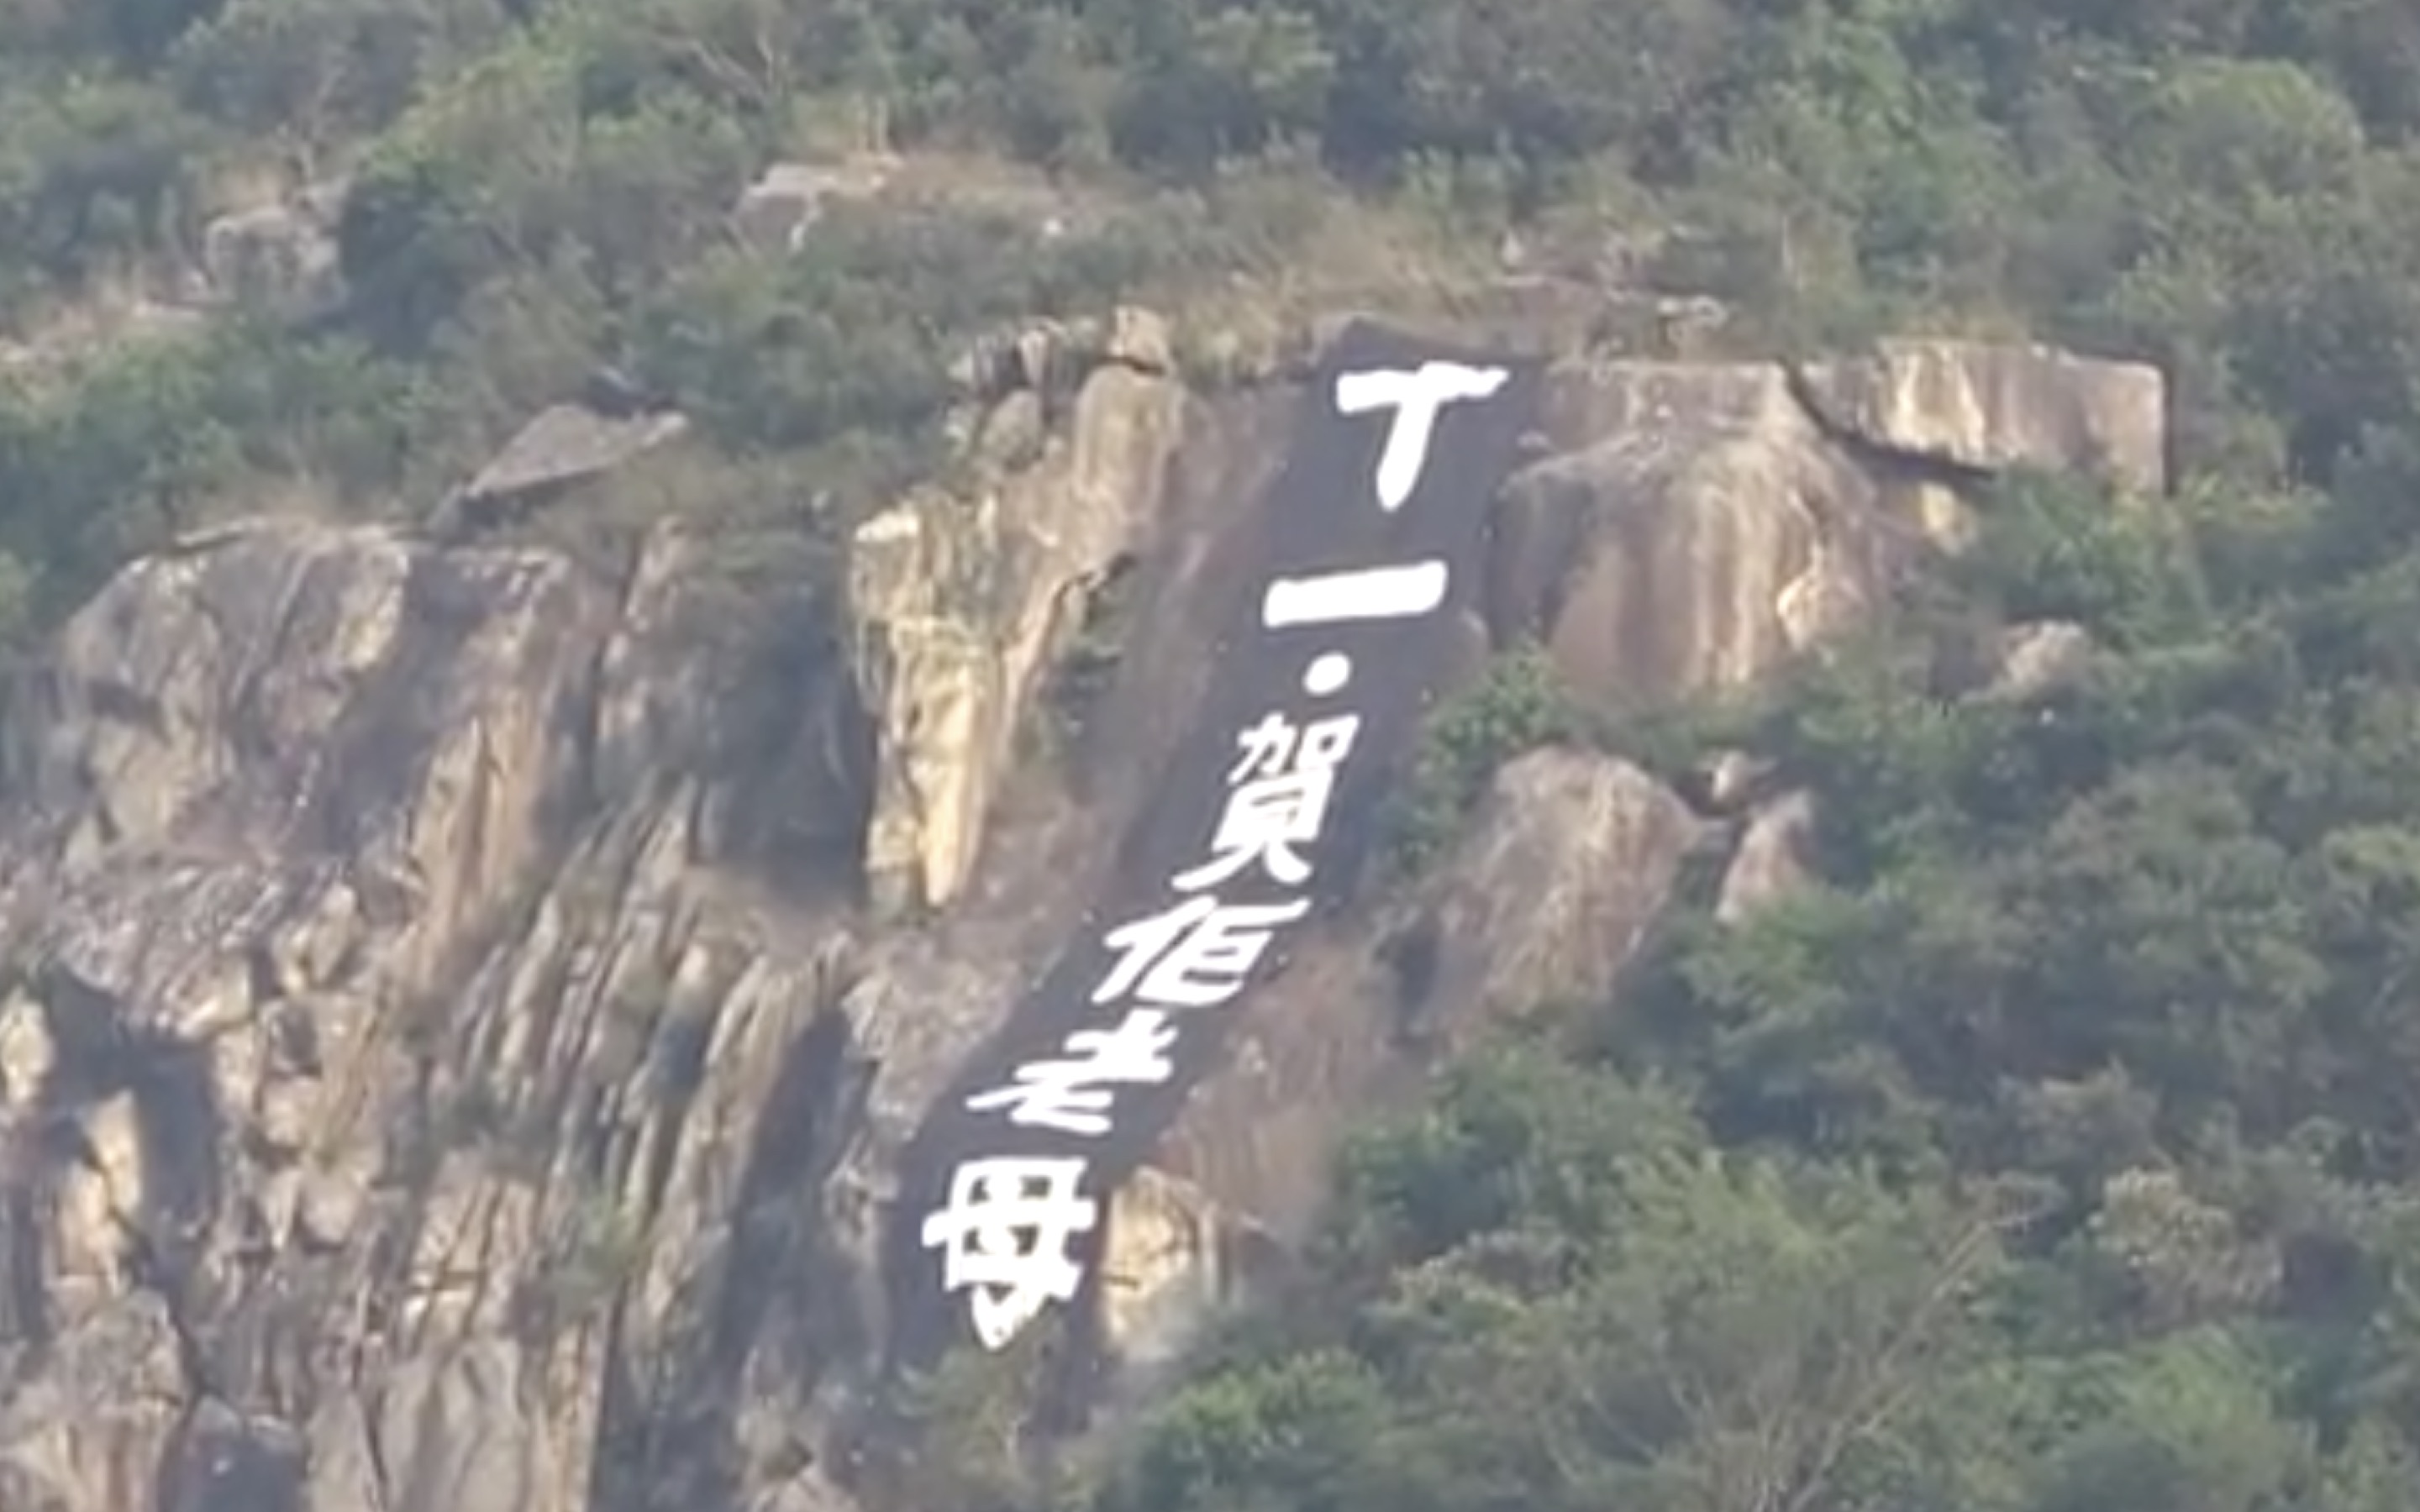 A banner reading ‘on October 1, celebrate your mom’ was found unfurled on Beacon Hill this morning. Screengrab via Apple Daily video.